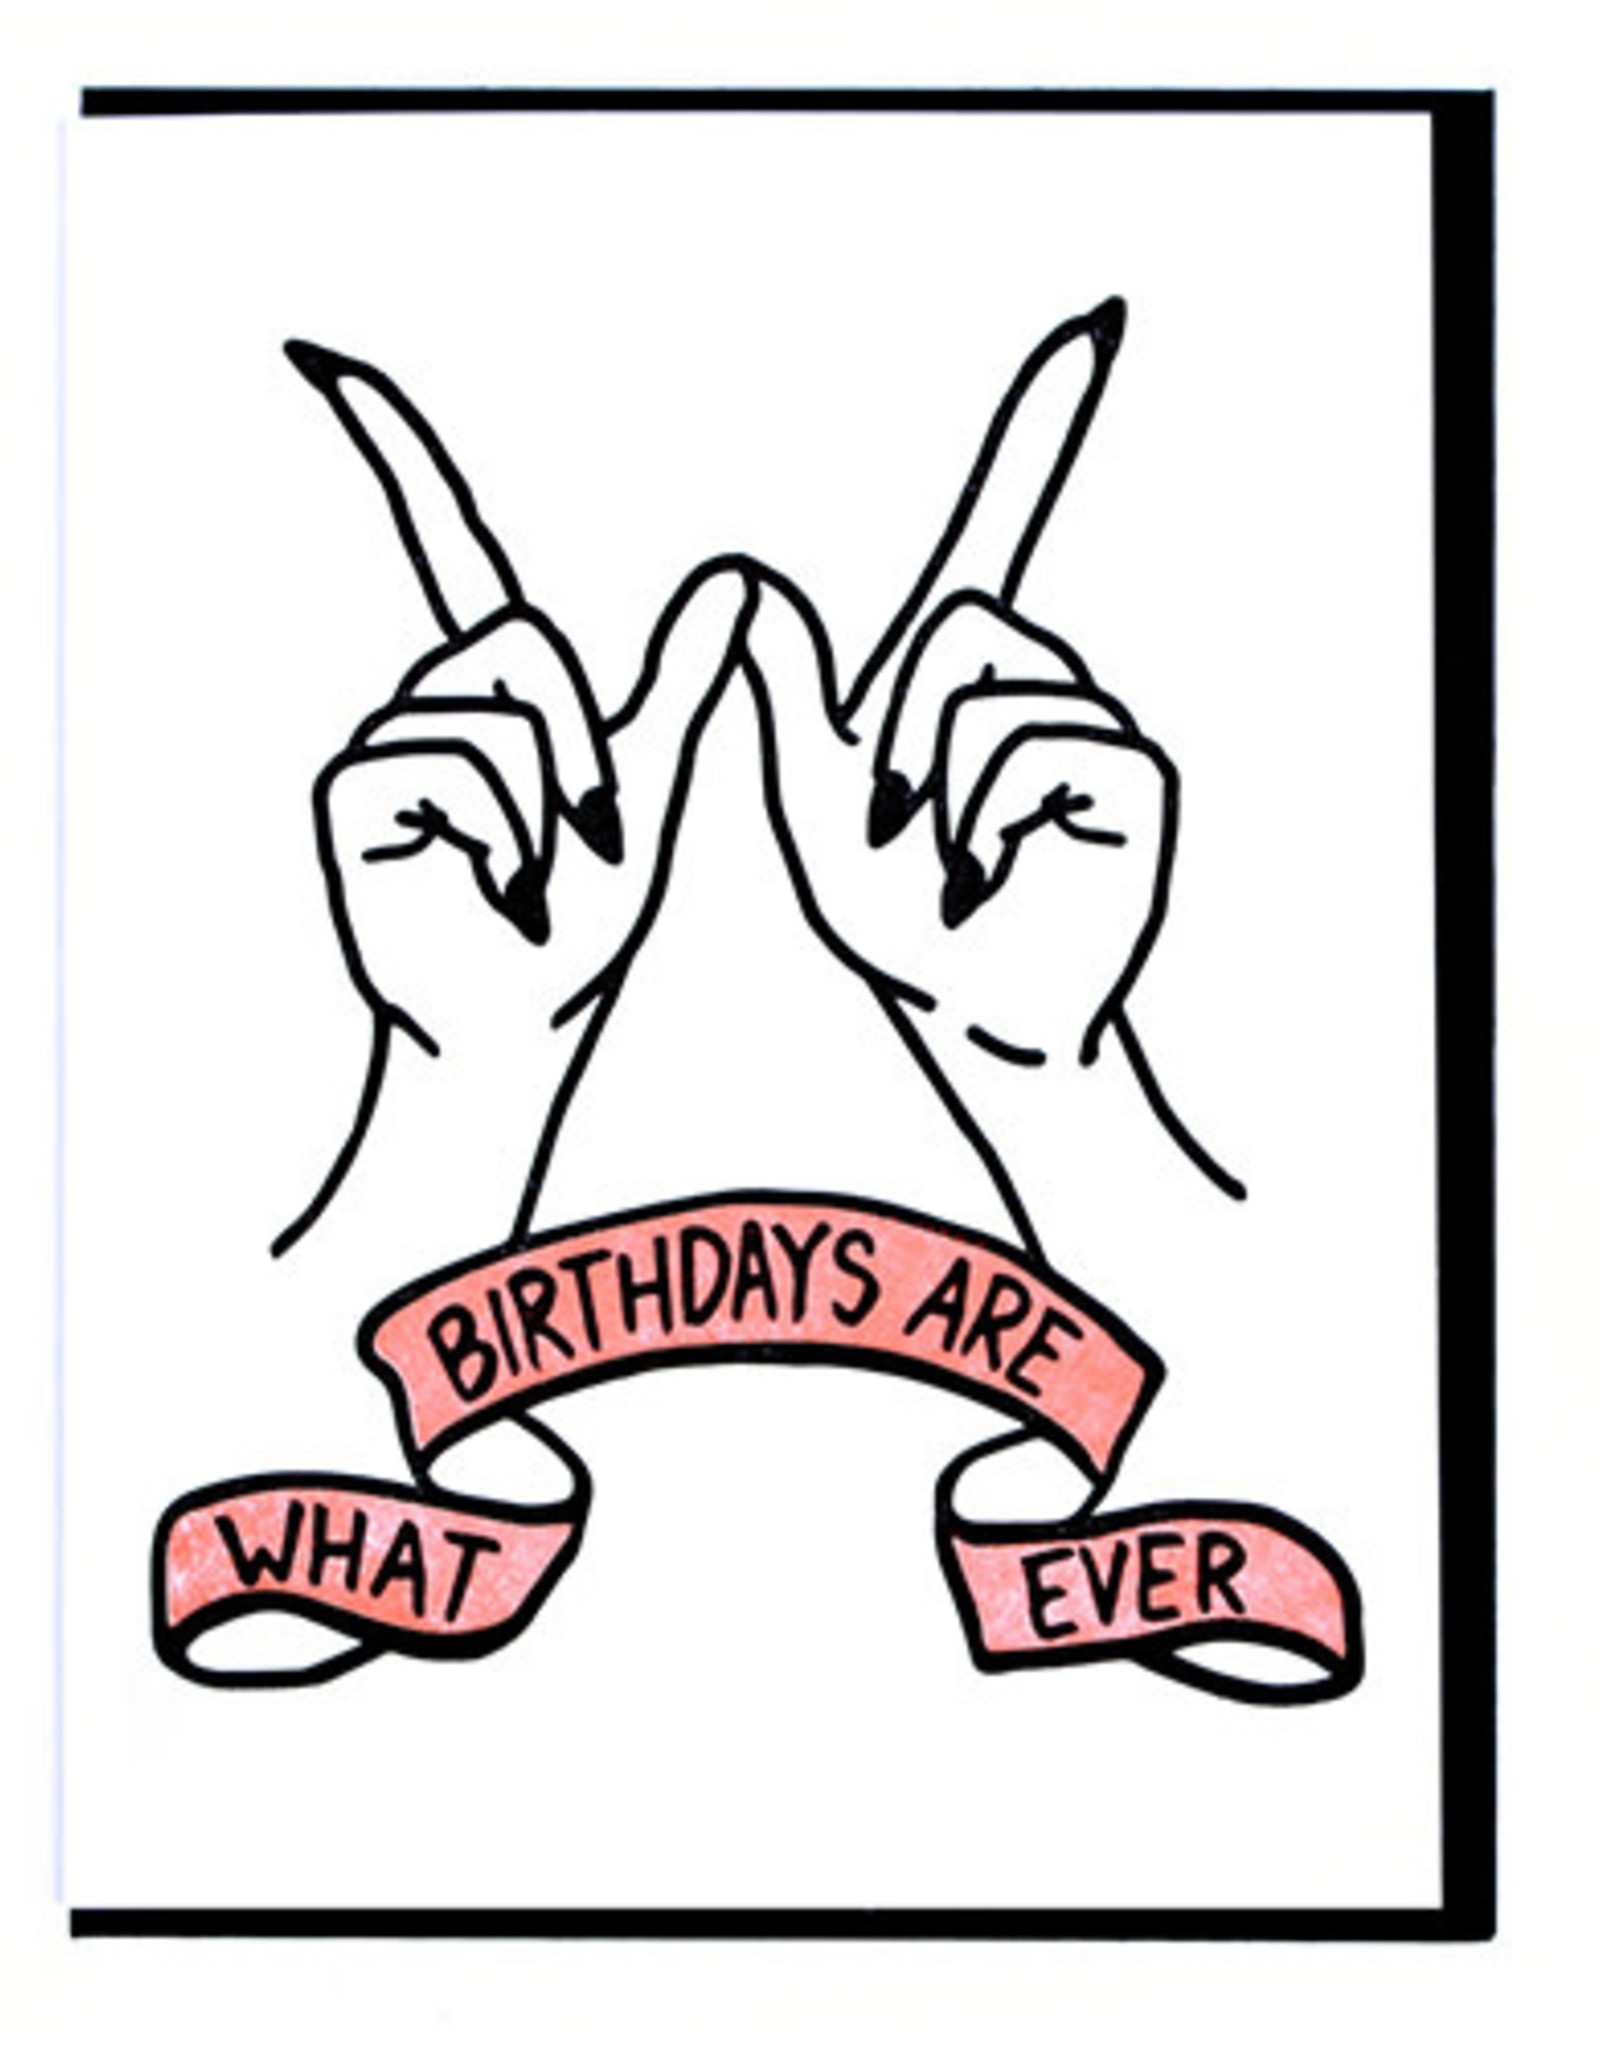 Bdays are Whatever Greeting Card